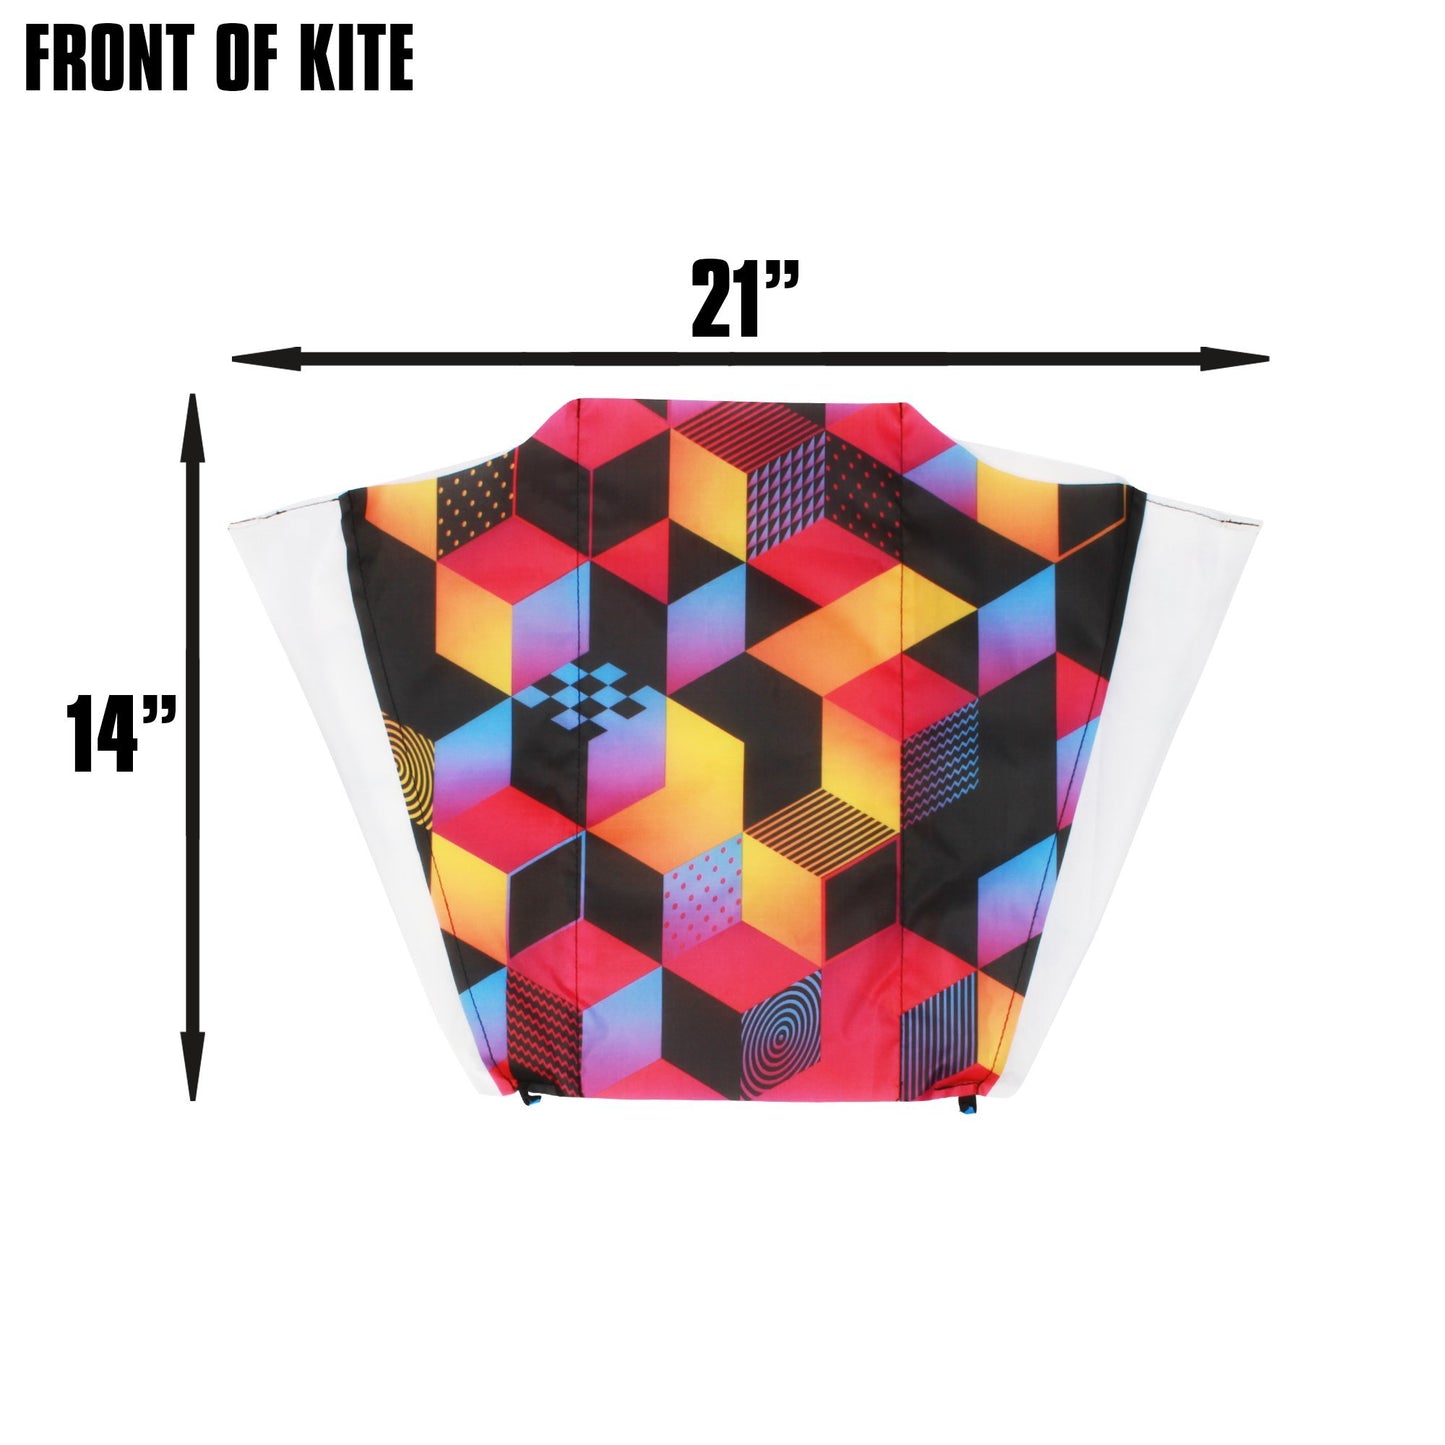 X Kites SkyFoil ZigZag + Pocket Kite Isometric Parafoil Kite Bundle - No Assembly Required photo of product in use